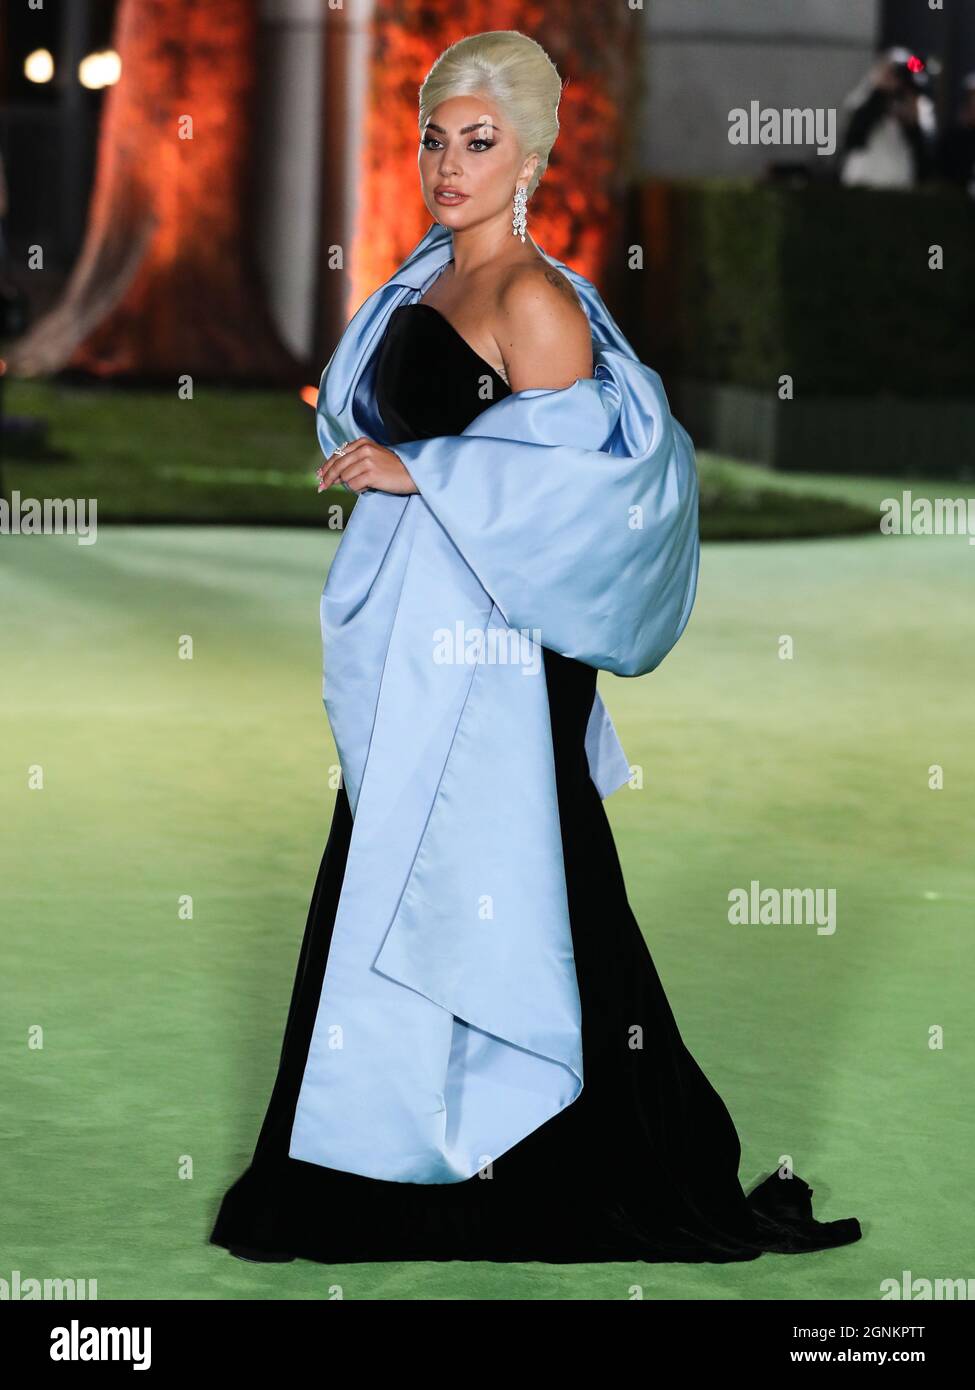 LOS ANGELES, CALIFORNIA, USA - SEPTEMBER 25: Singer Lady Gaga (Stefani Joanne Angelina Germanotta) wearing a custom Schiaparelli dress and Chopard jewelry arrives at the Academy Museum of Motion Pictures Opening Gala held at the Academy Museum of Motion Pictures on September 25, 2021 in Los Angeles, California, United States. (Photo by Xavier Collin/Image Press Agency/Sipa USA) Stock Photo